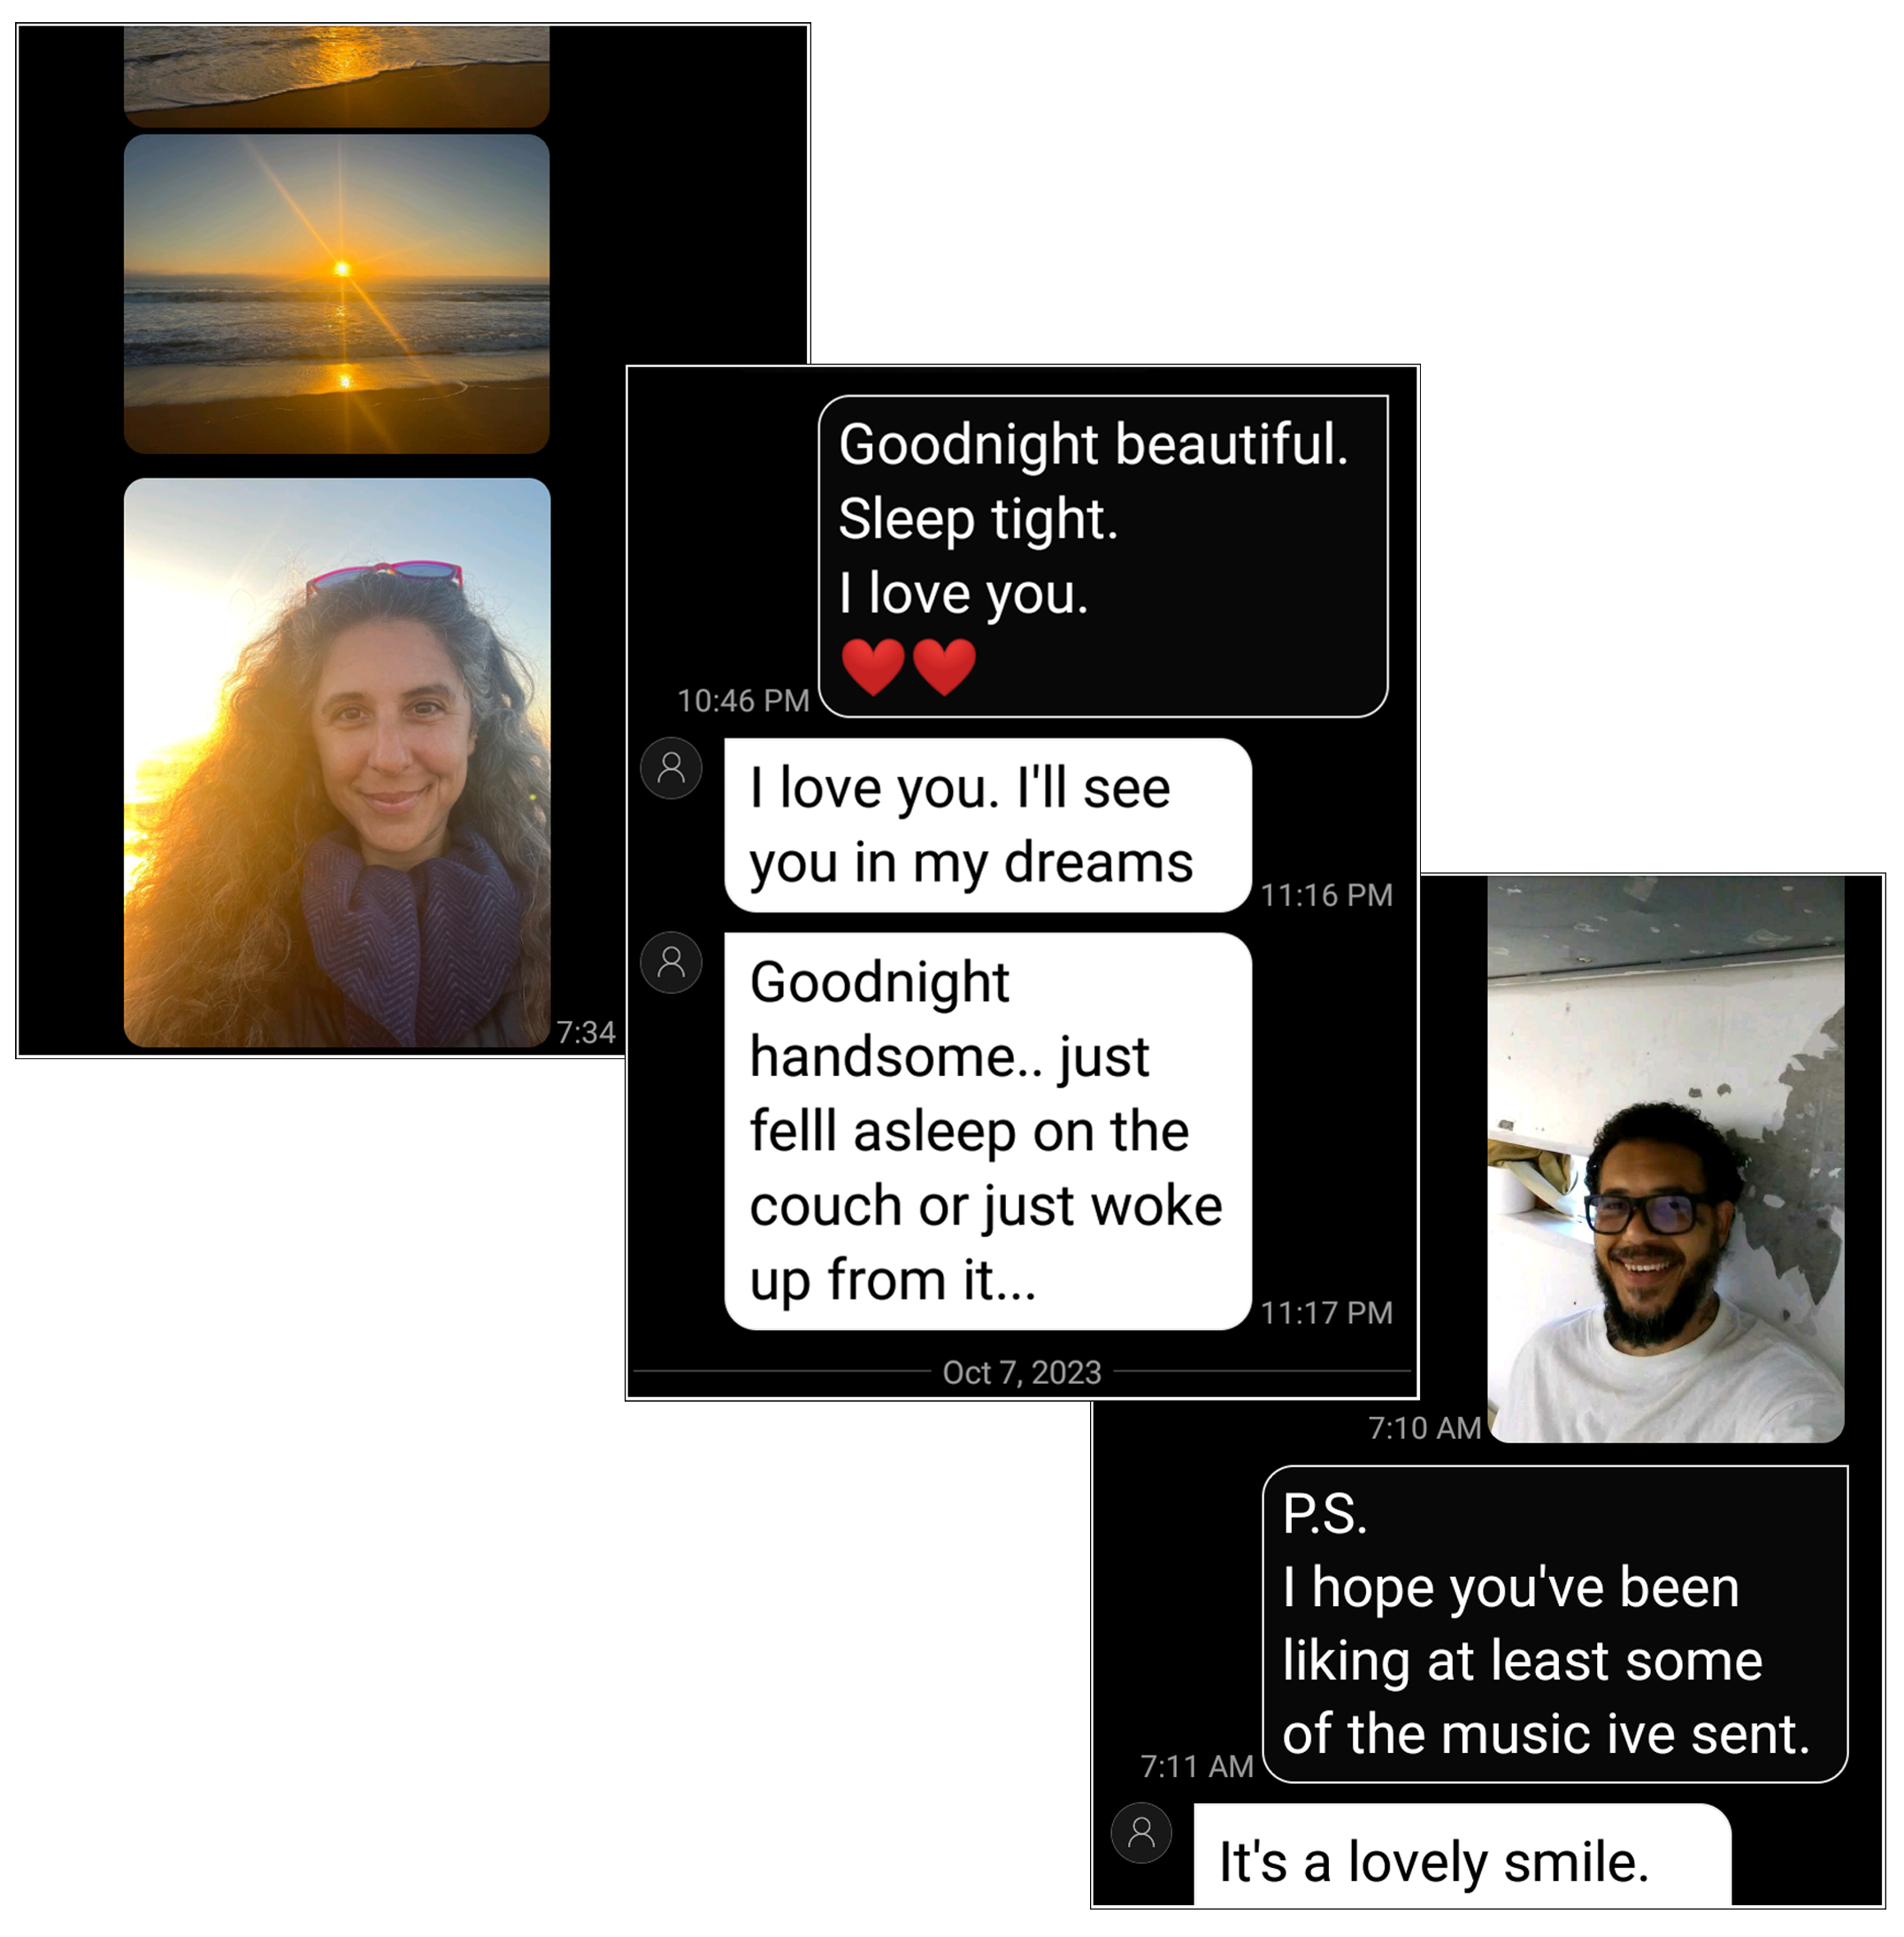 The image collage includes sunset photos, a selfie of a woman outdoors, a selfie of a smiling man, and a series of affectionate text messages exchanged between two people.